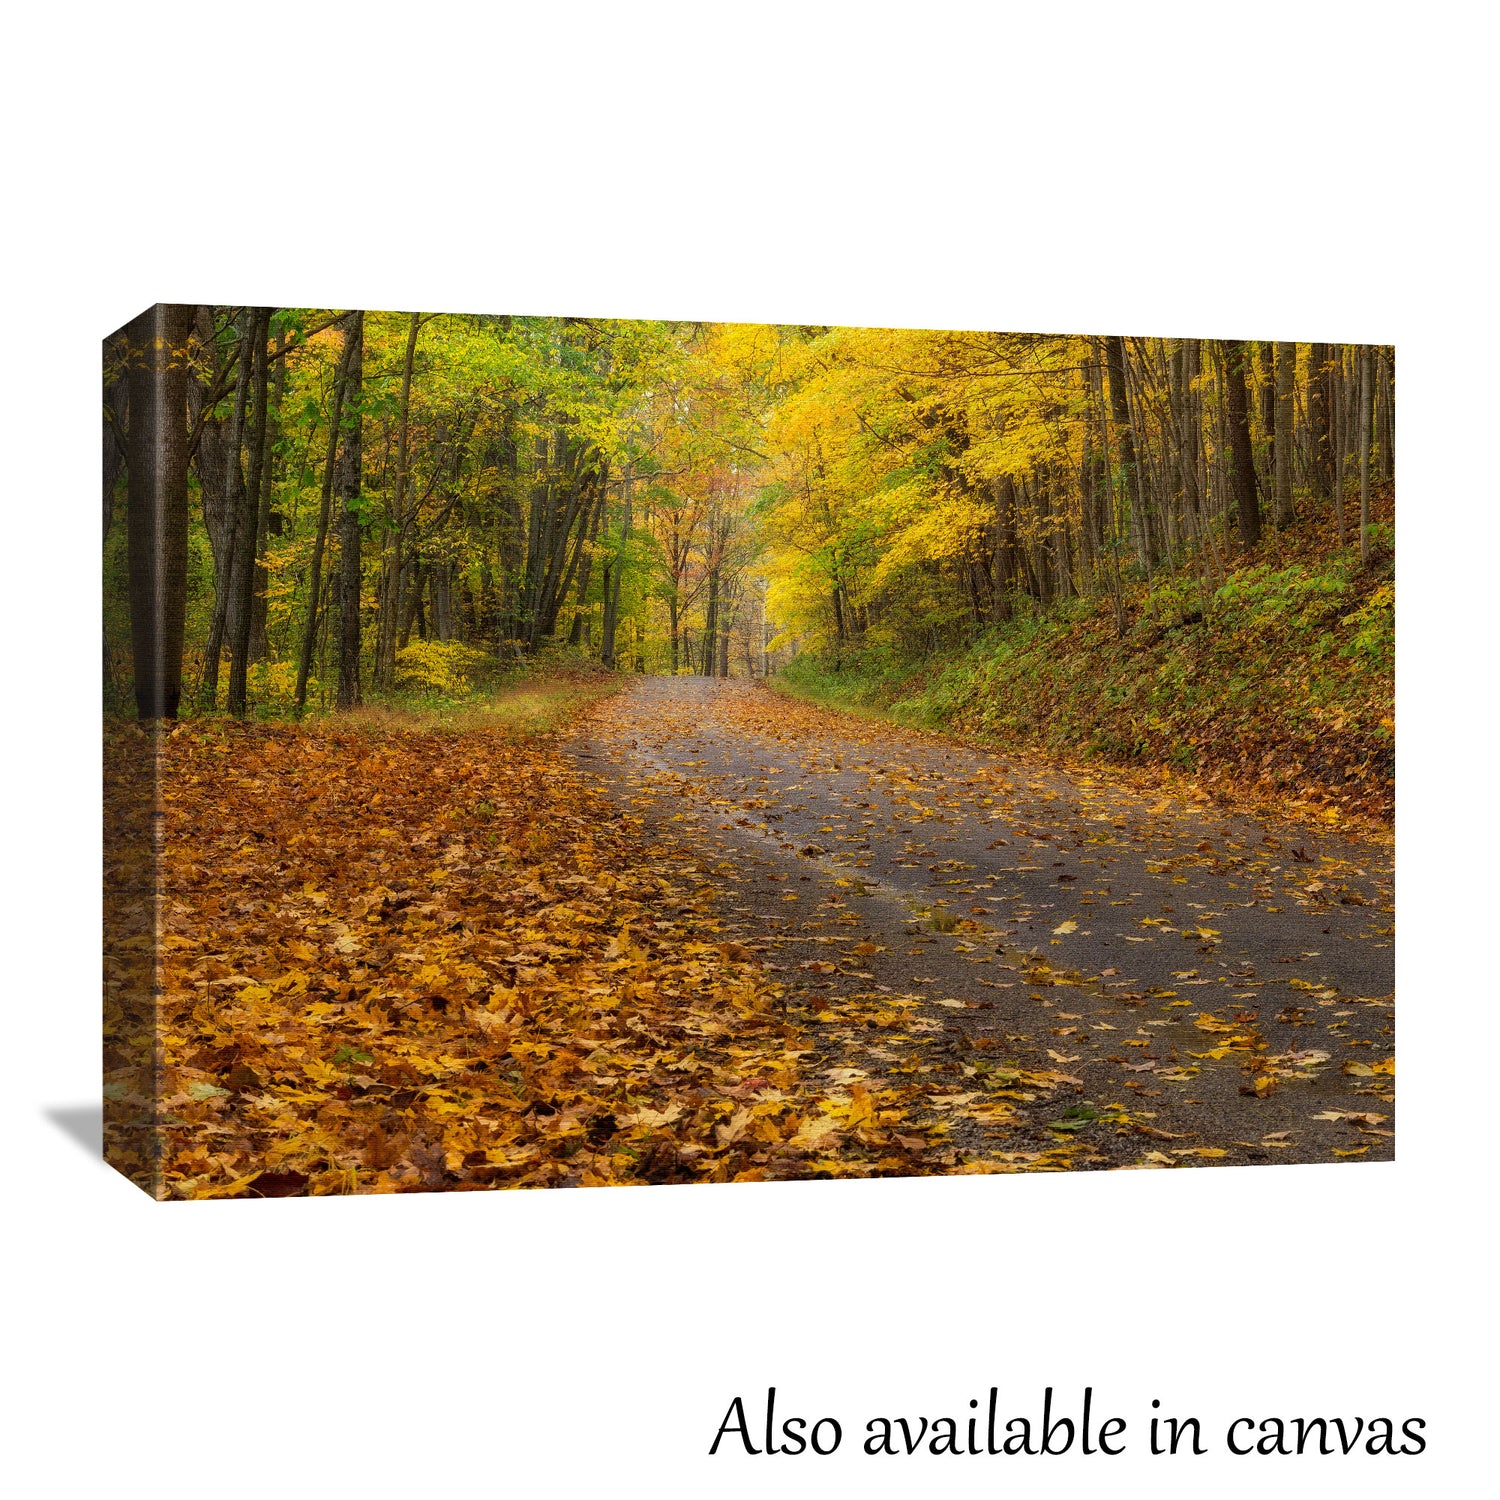 The autumn road fall photograph is beautifully presented on a gallery-wrapped canvas, showing this photograph is also available as a canvas print for those interested in a ready-to-hang solution.